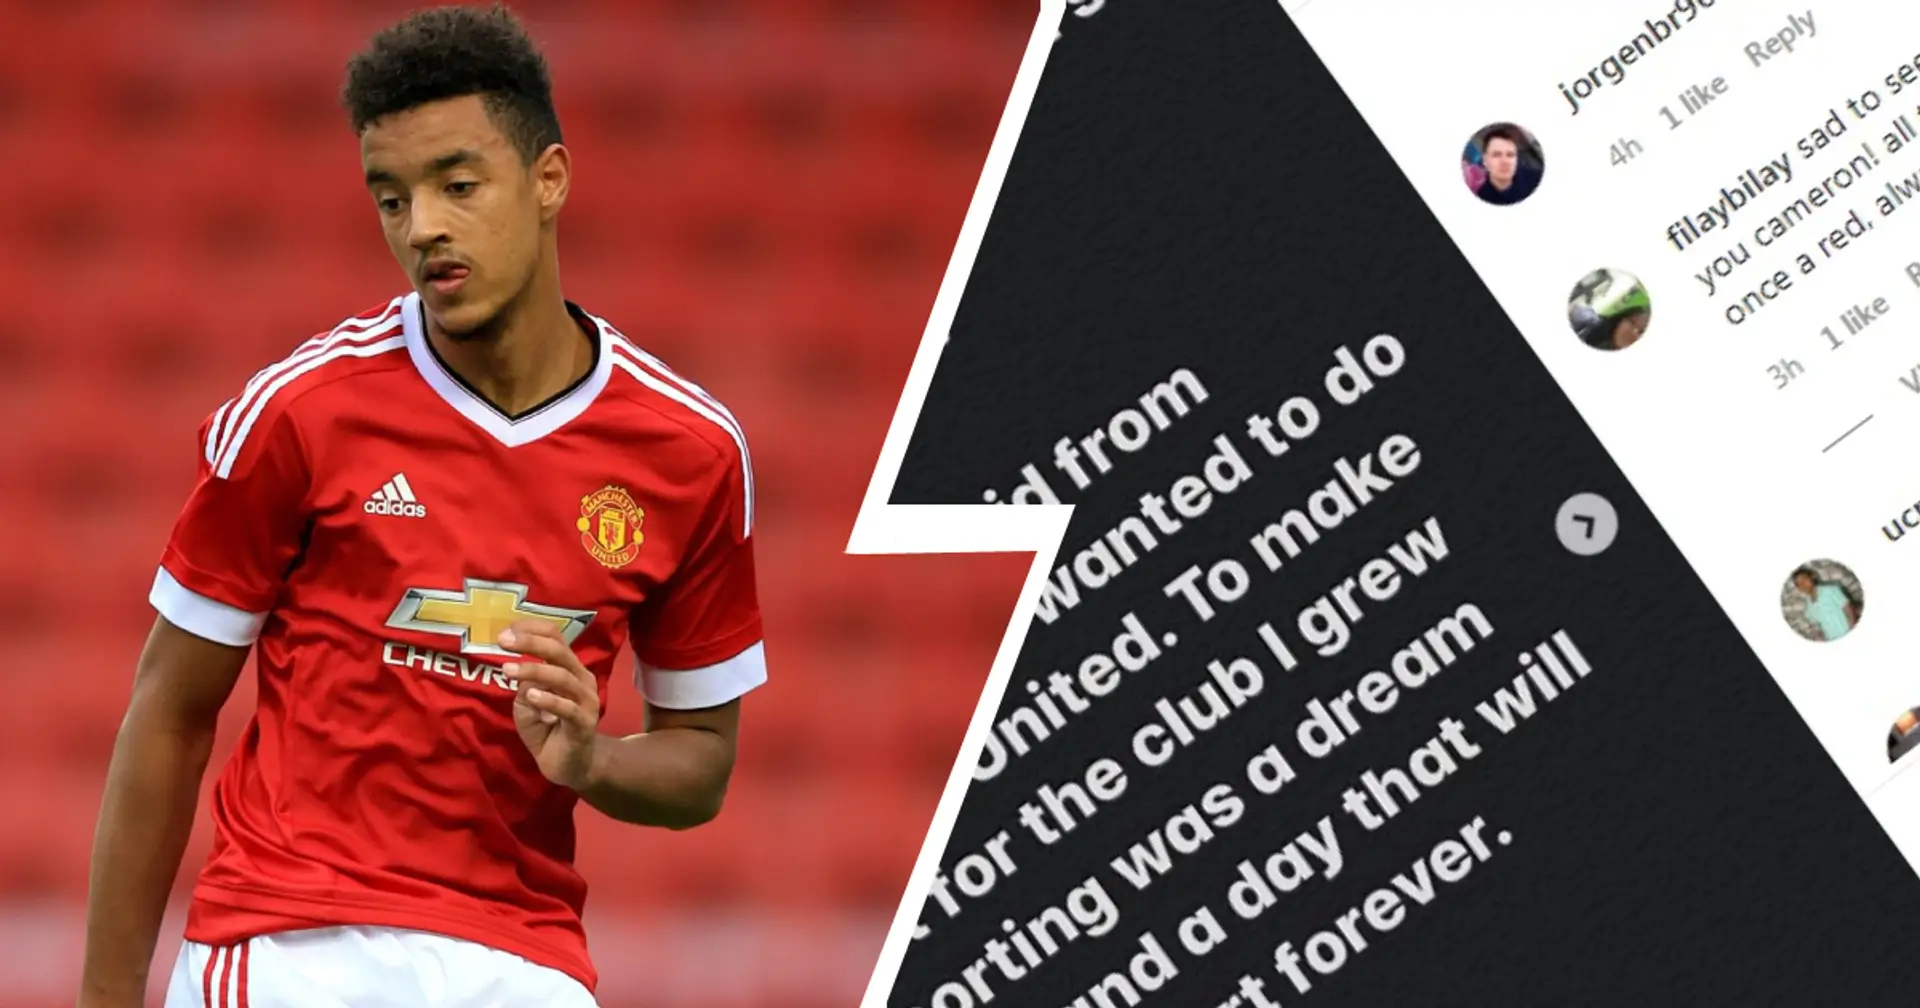 Borthwick-Jackson bids farewell to Man United: 'To make my debut for the club was a dream come true'